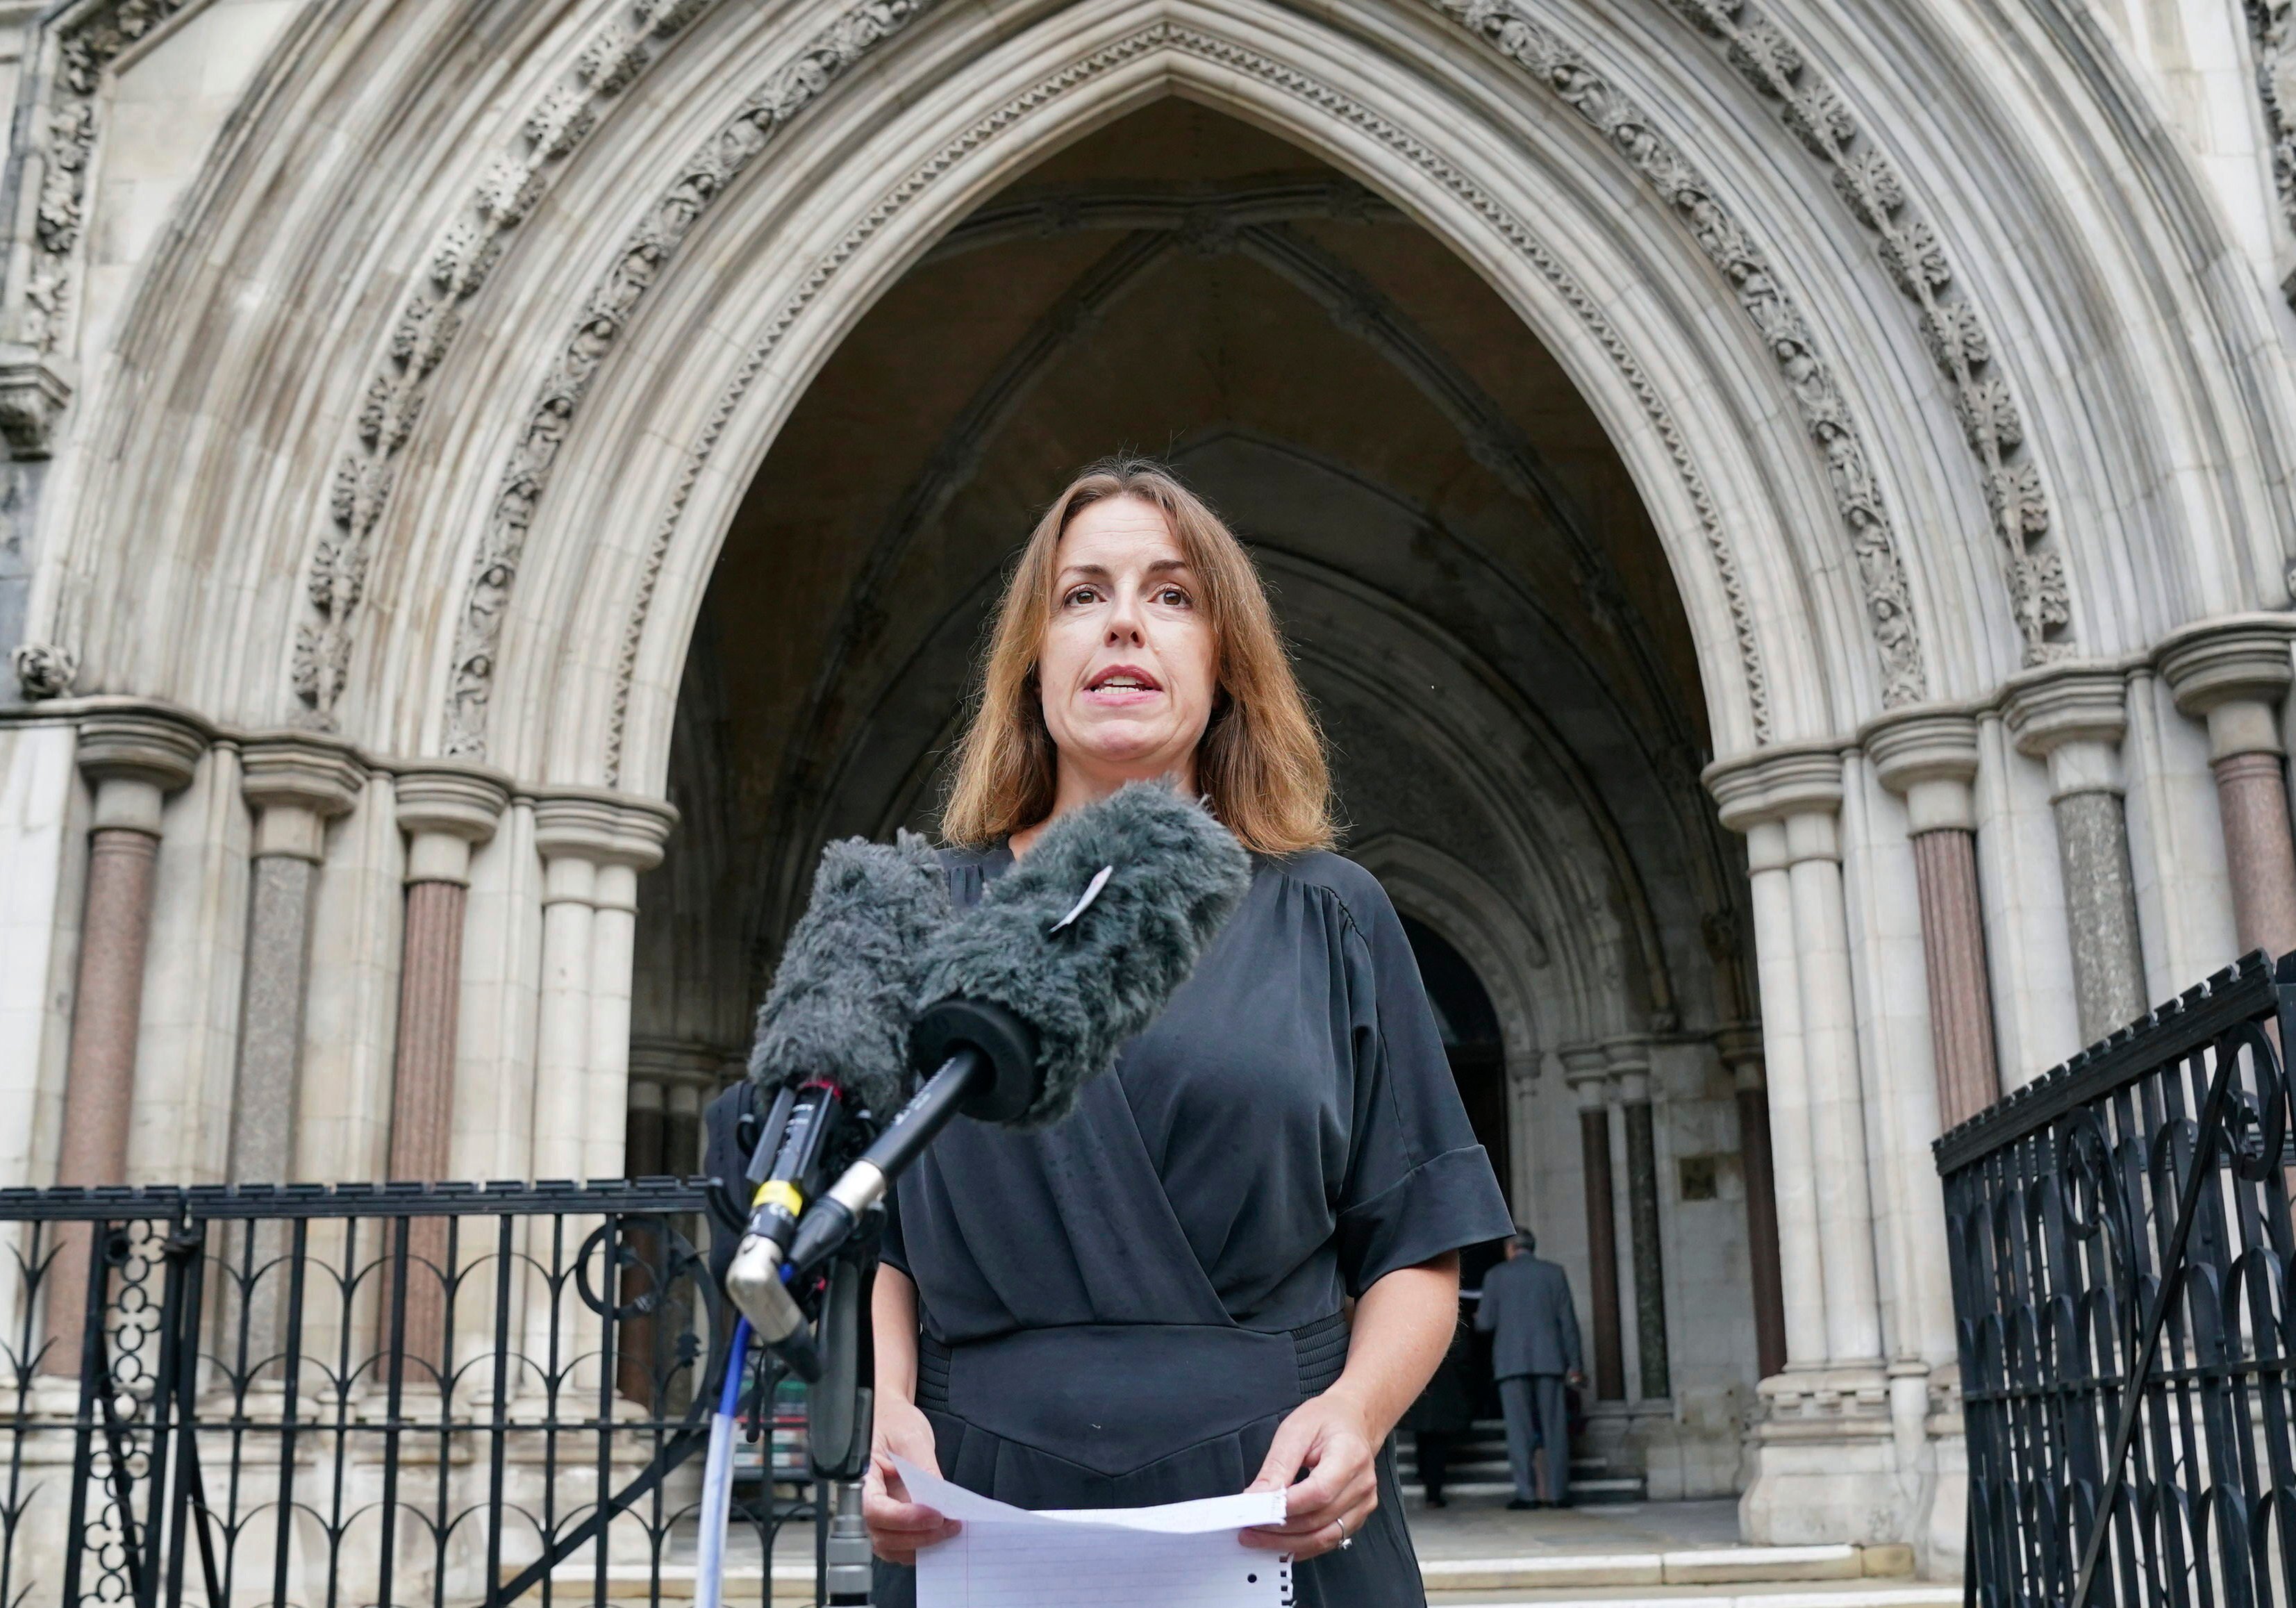 Lawyer Tessa Gregory from Leigh Day solicitors, representing Afghan families affected by alleged illegal activity by British special forces, outside the Royal Courts of Justice in London, UK on Monday. Photo: PA via AP